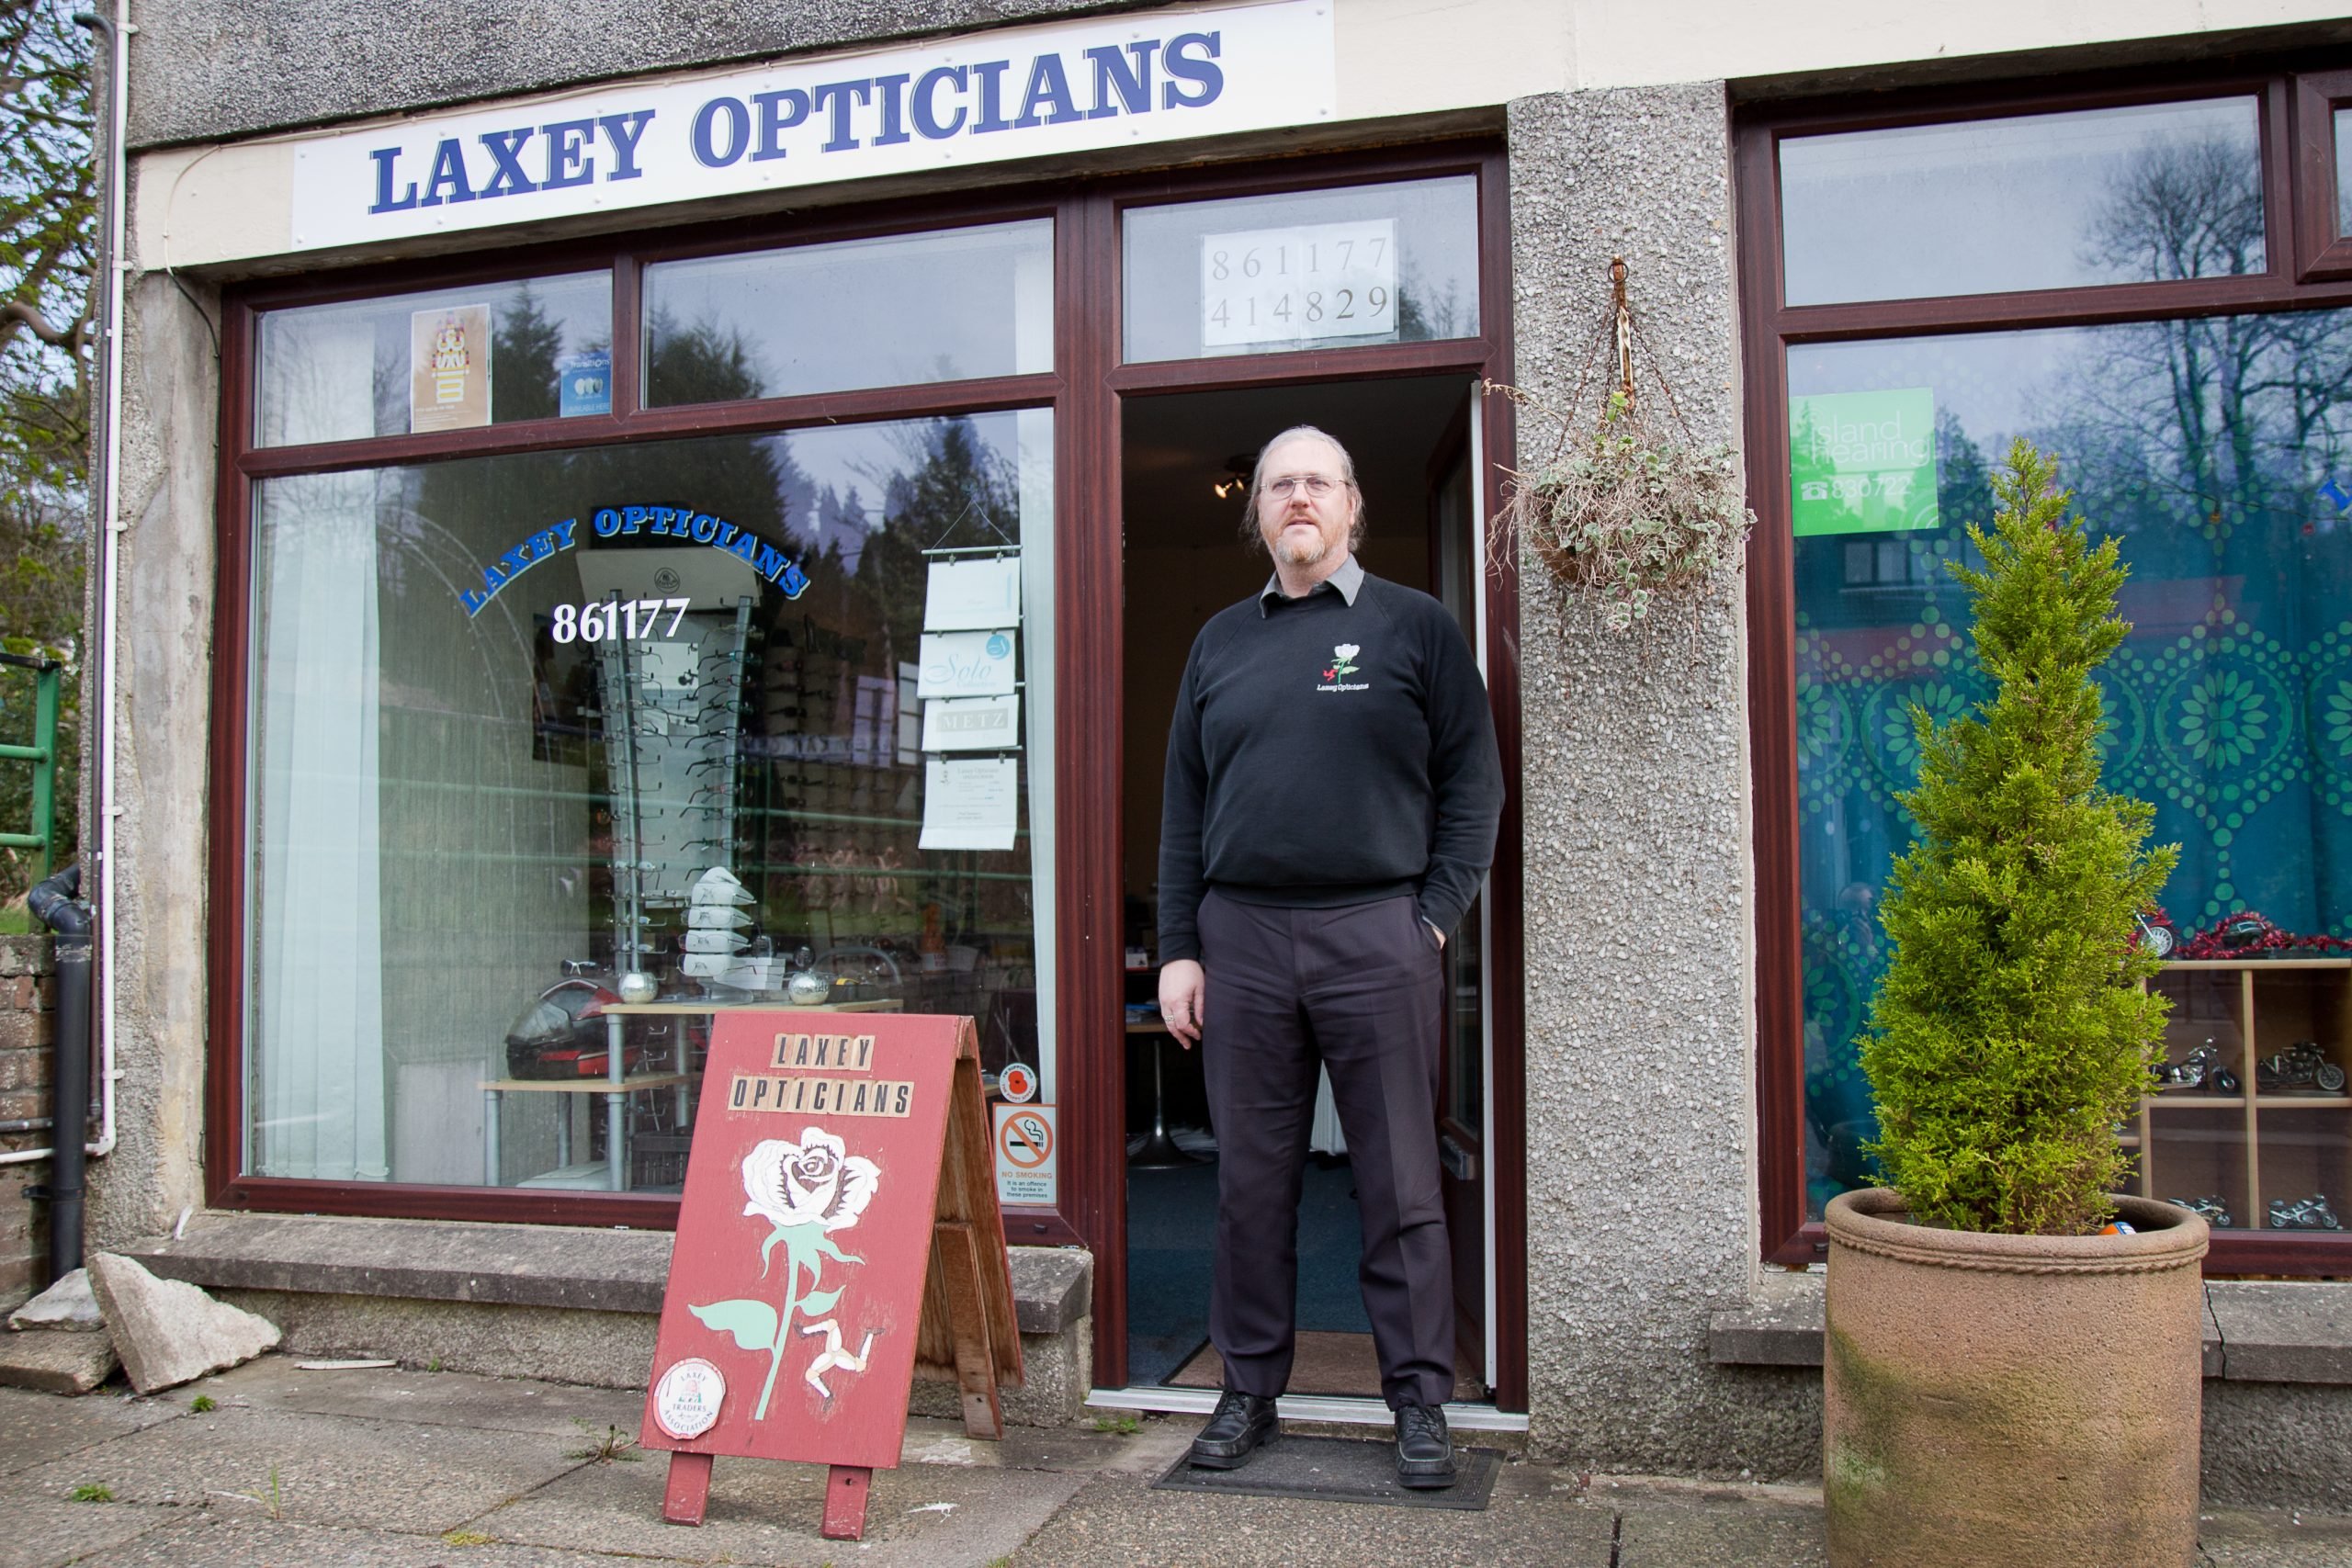 Laxey Opticians 1 Whitehouse Close, New Road, Laxey IM4 7BA